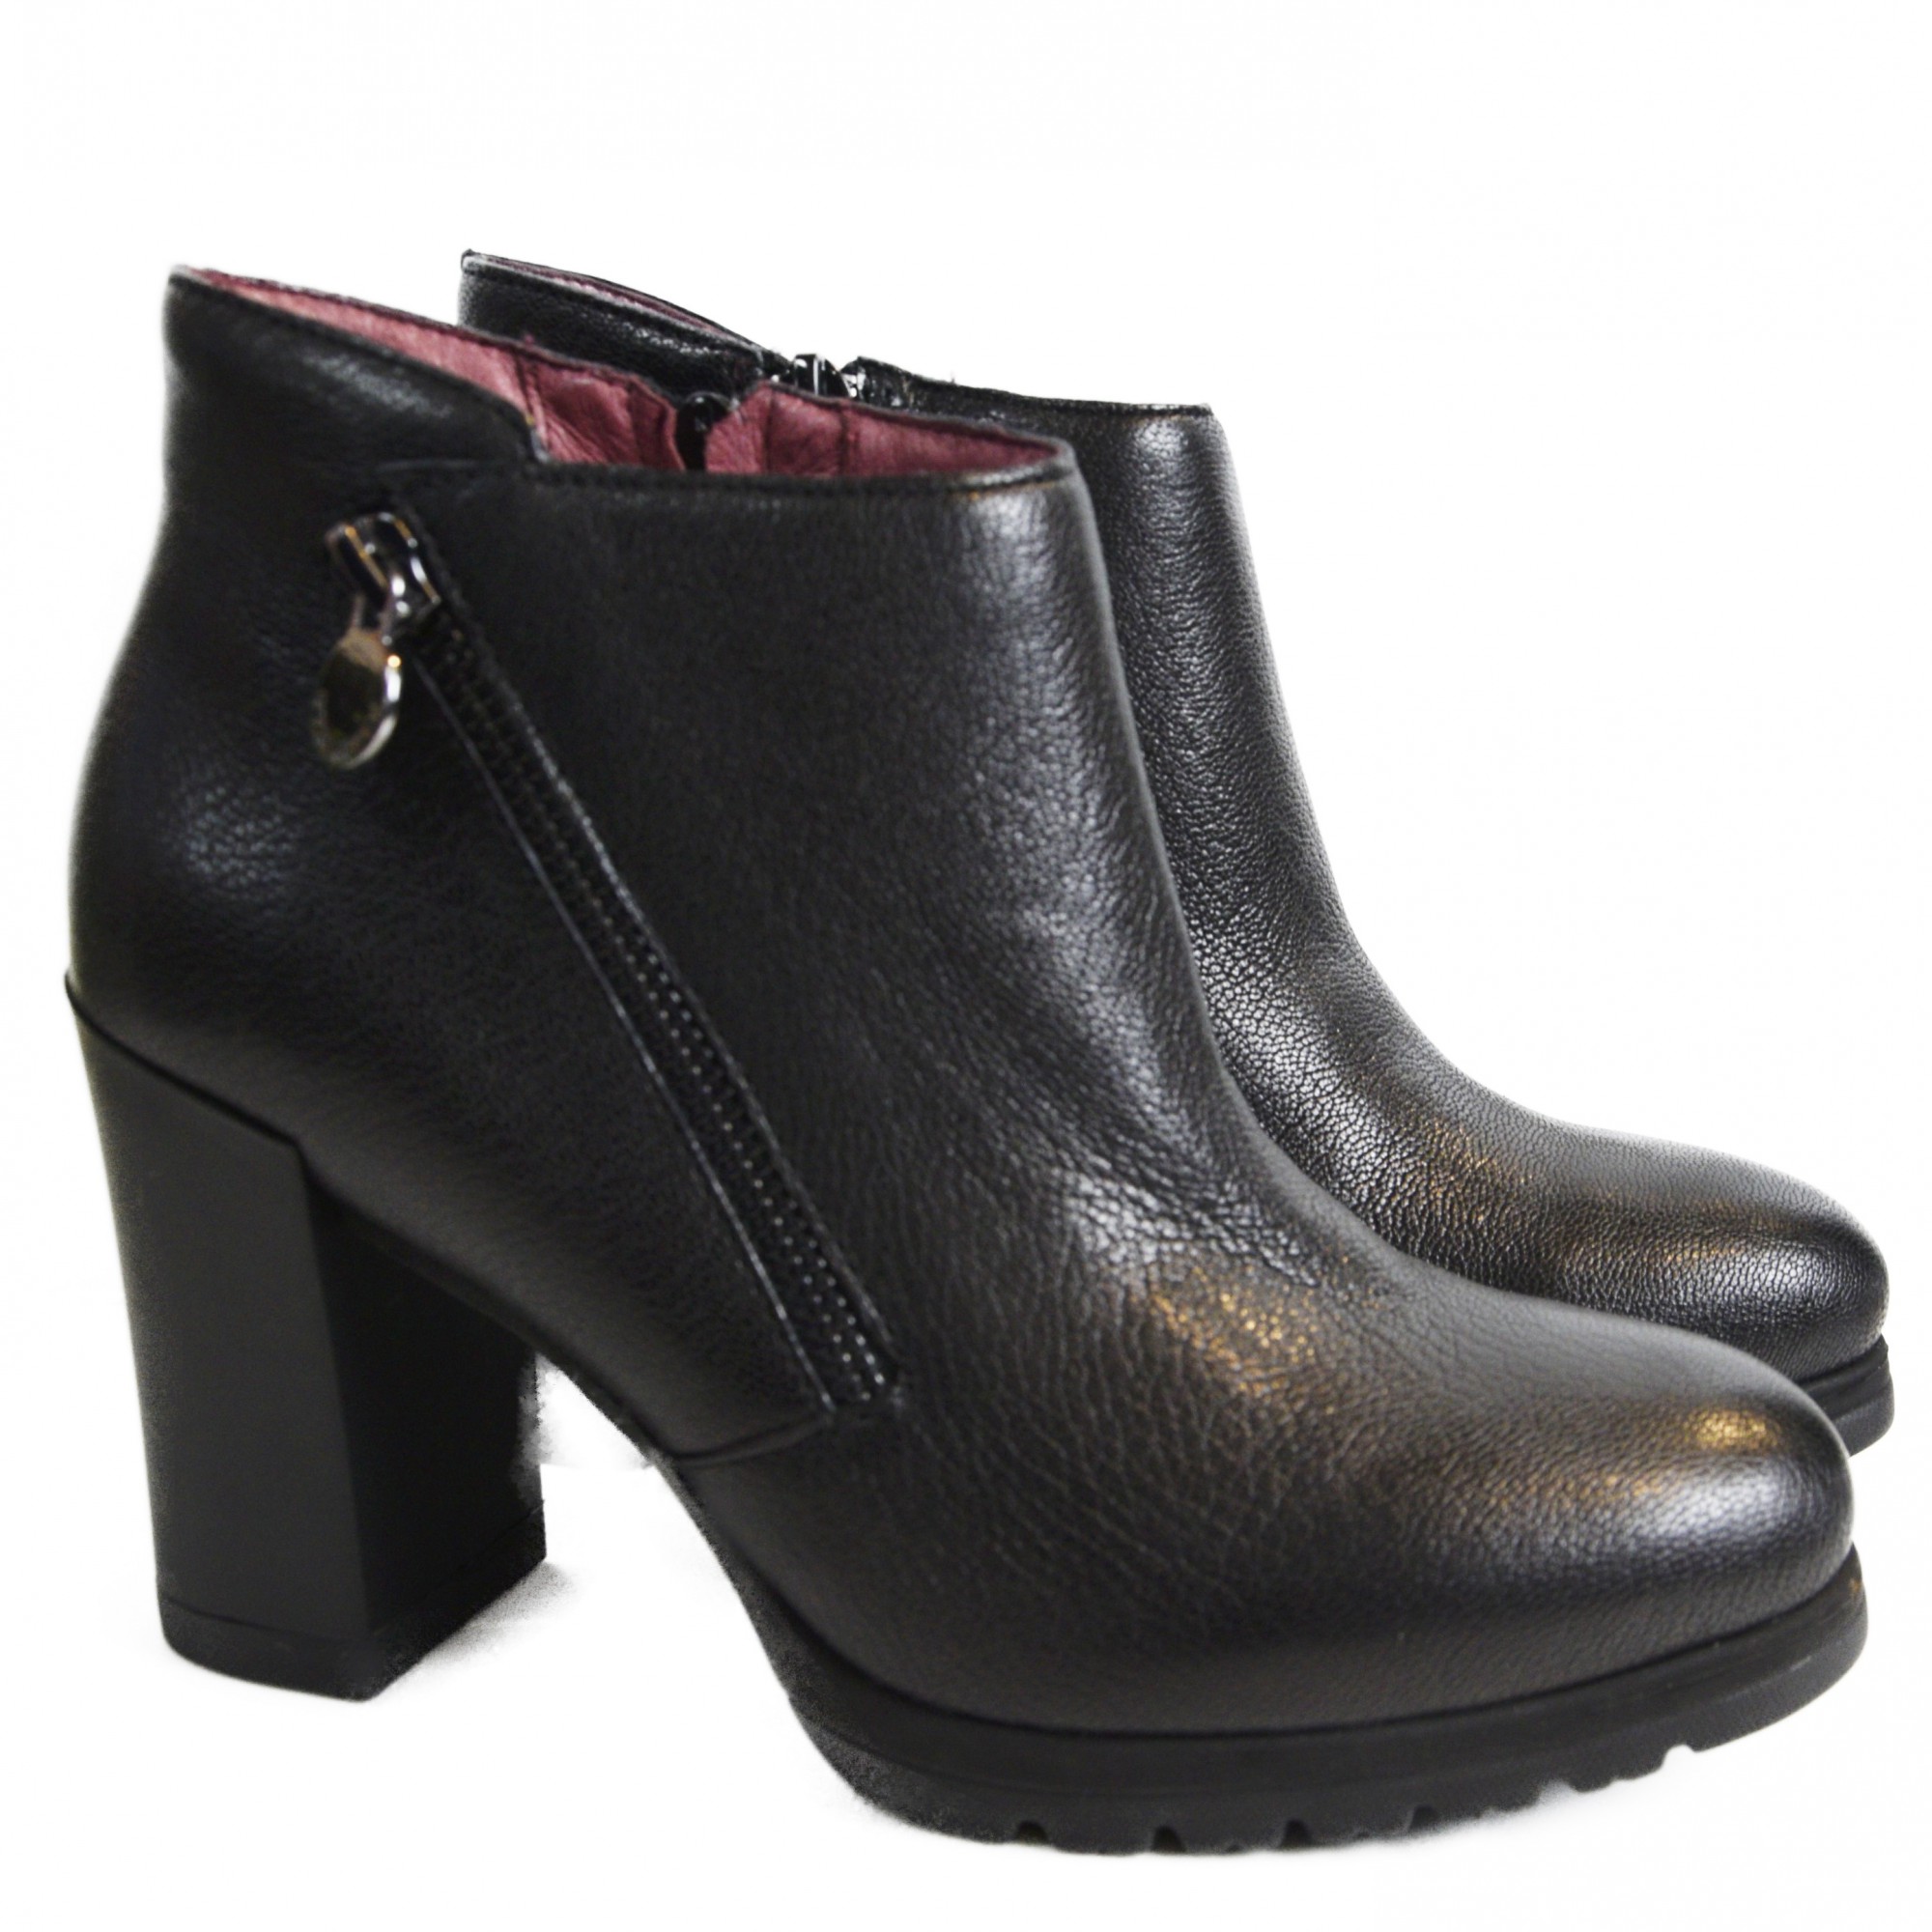 STONEFLY WOMEN BOOT WITH ZIP OVER8 BLACK | Woman Shoes and Boots ...